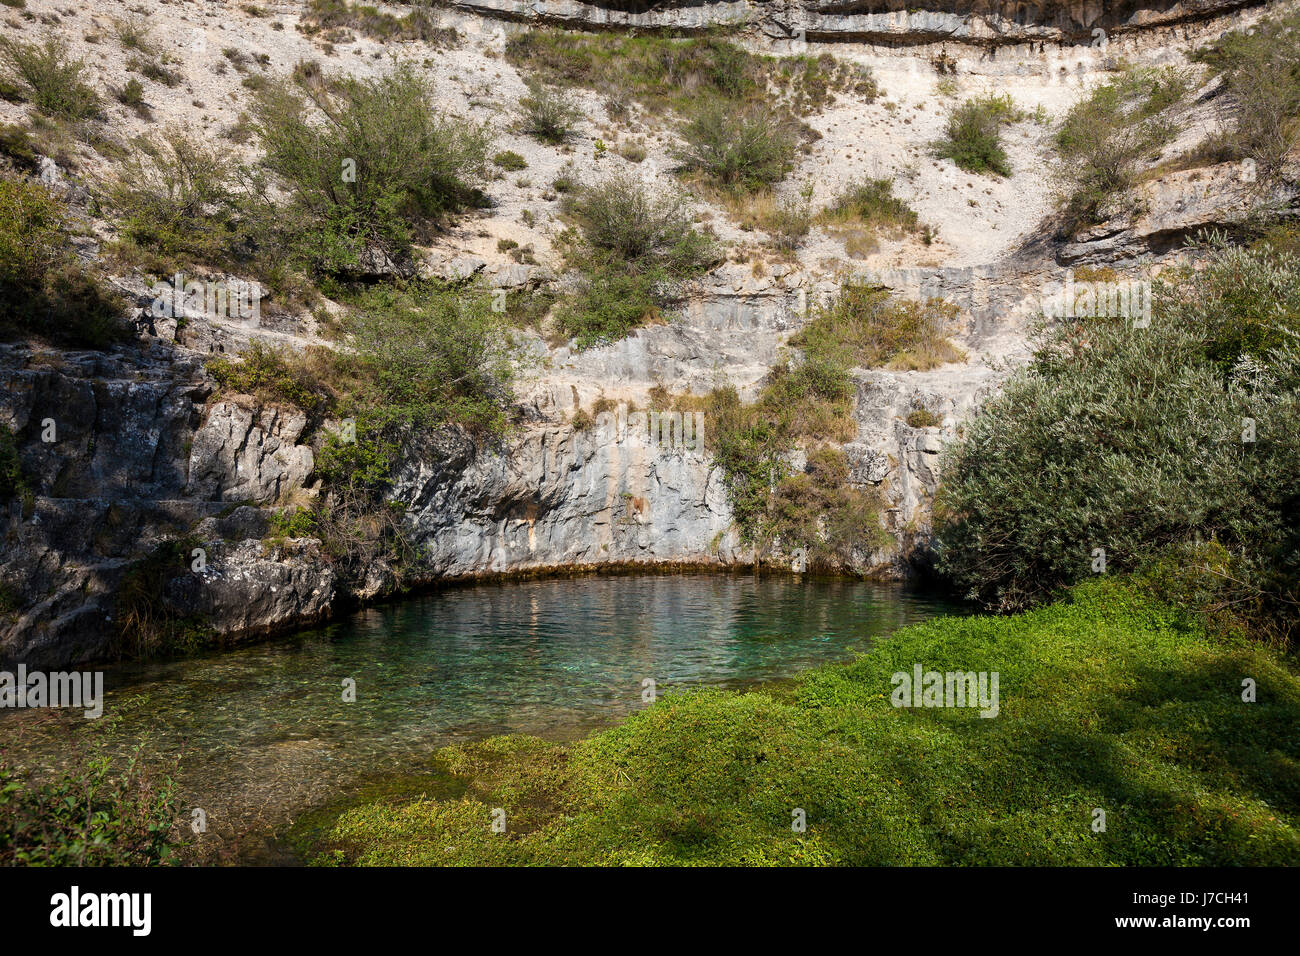 europe spain day during the day water stone cave landscape scenery countryside Stock Photo